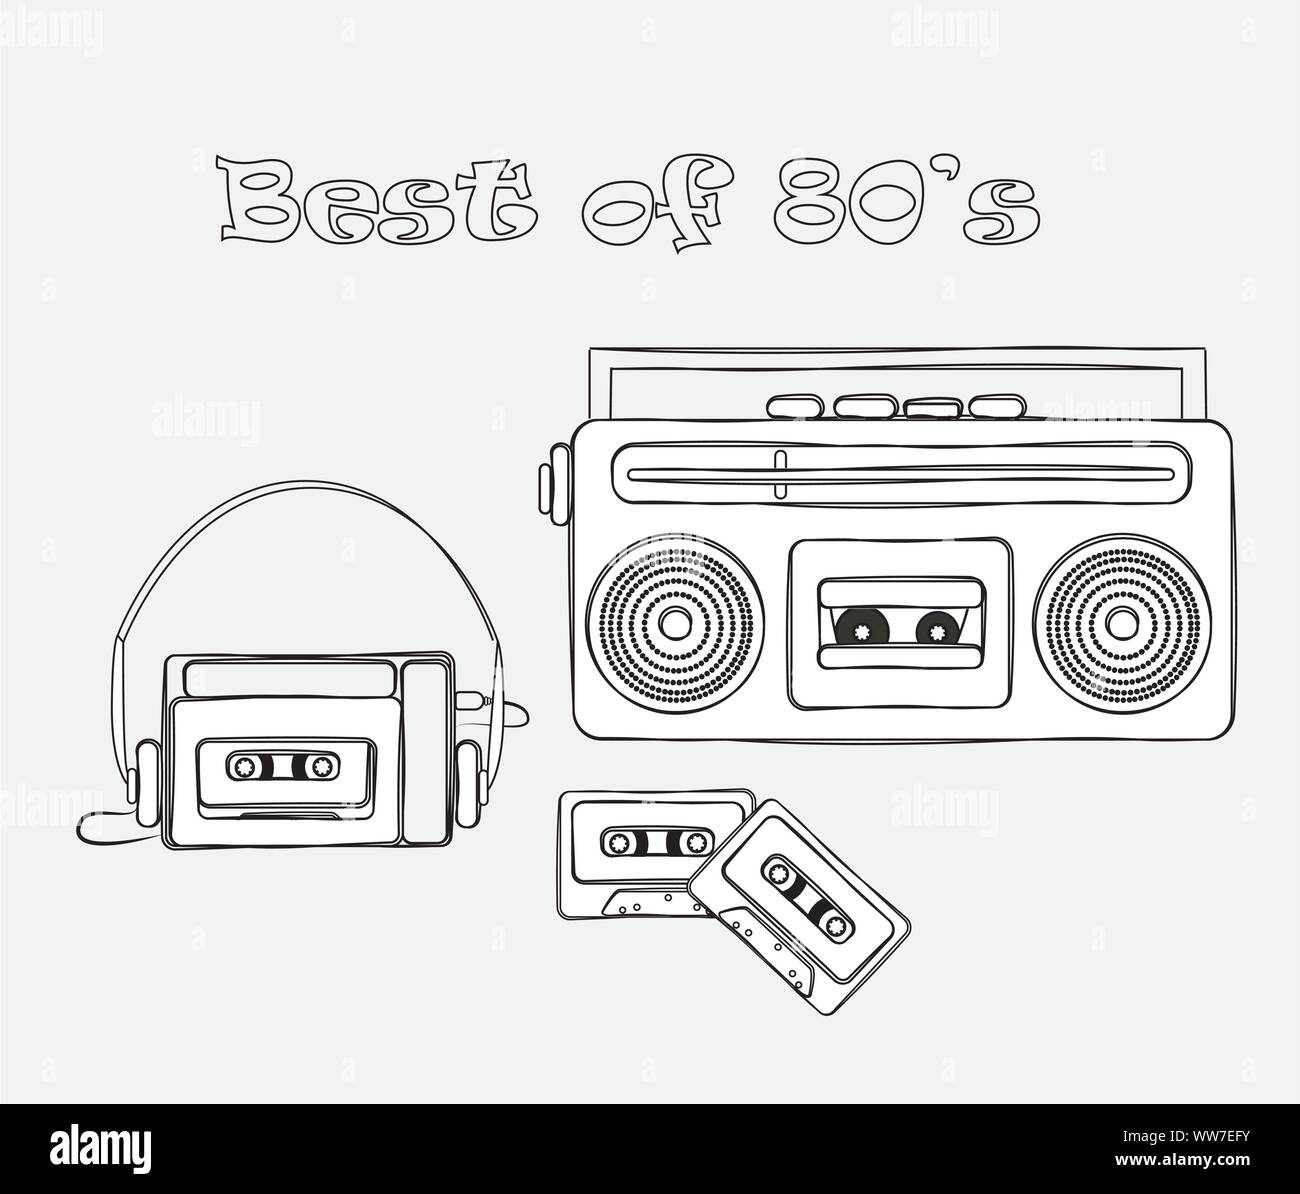 Cassette tapes and boombox. Music vector illustration. Hand drawn line art design. Best of 80's. Vintage elements. Stock Vector